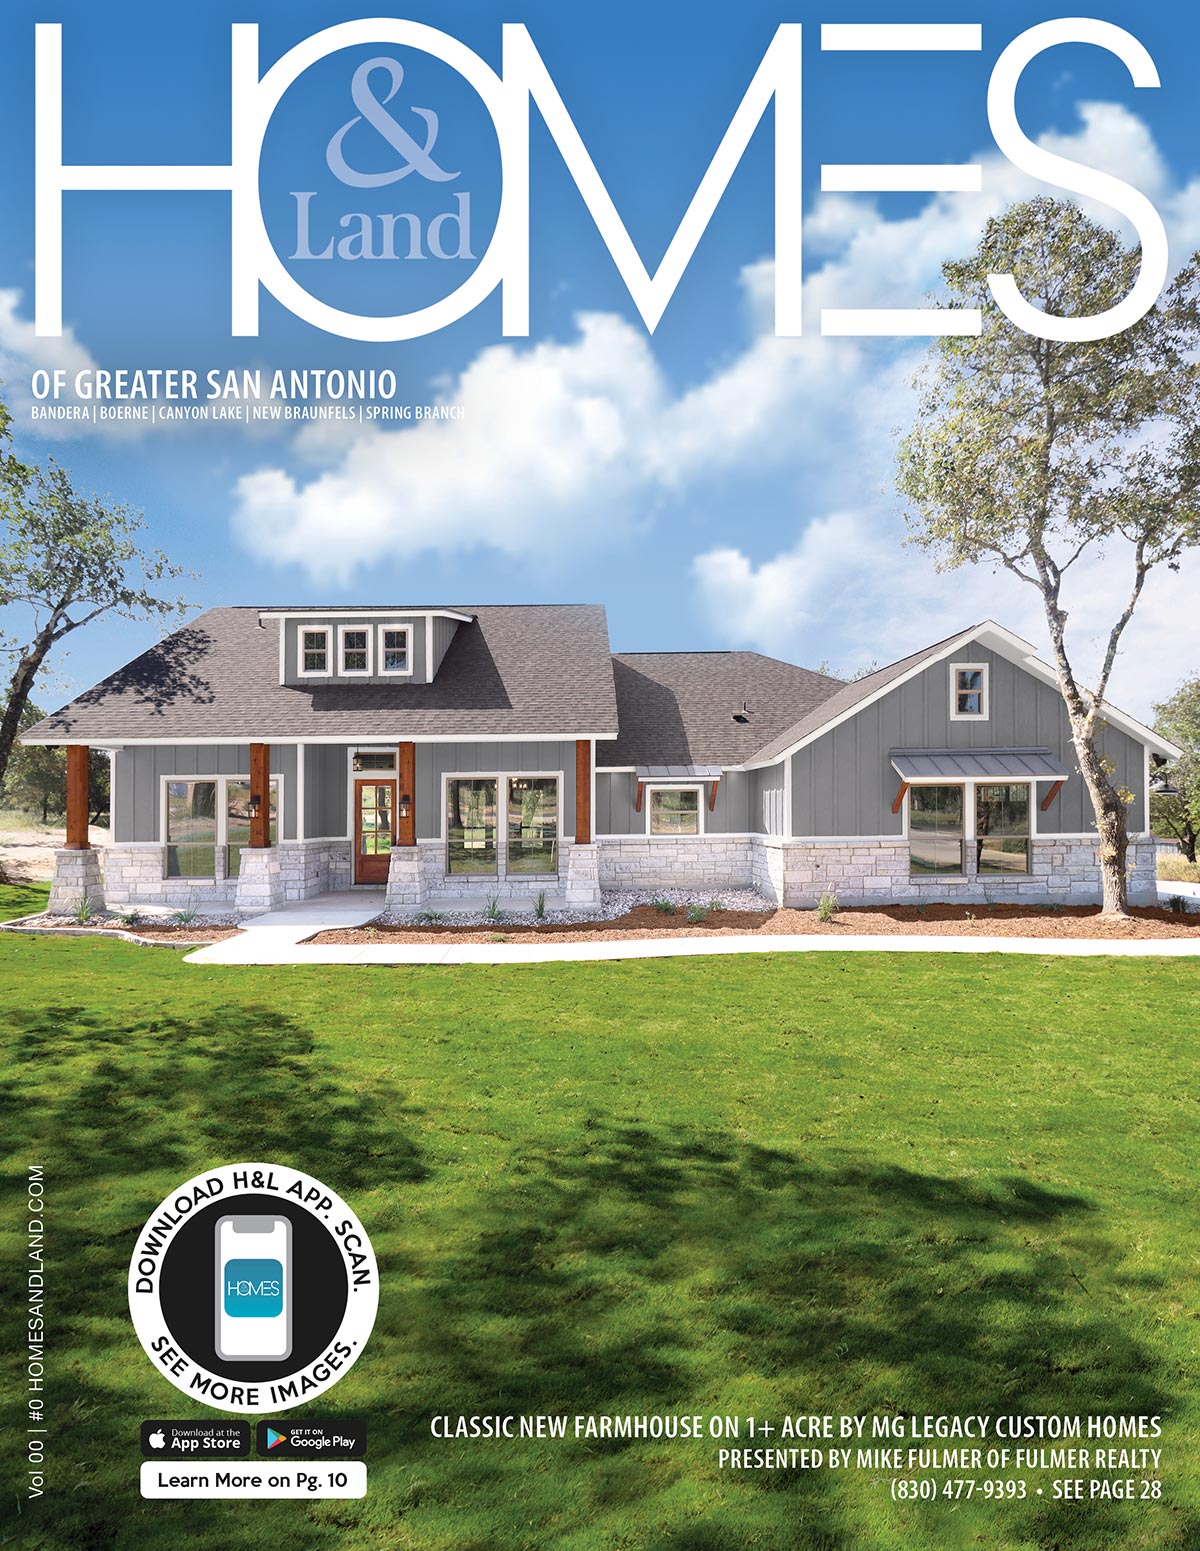 Homes & Land Magazine Cover Oct 2021